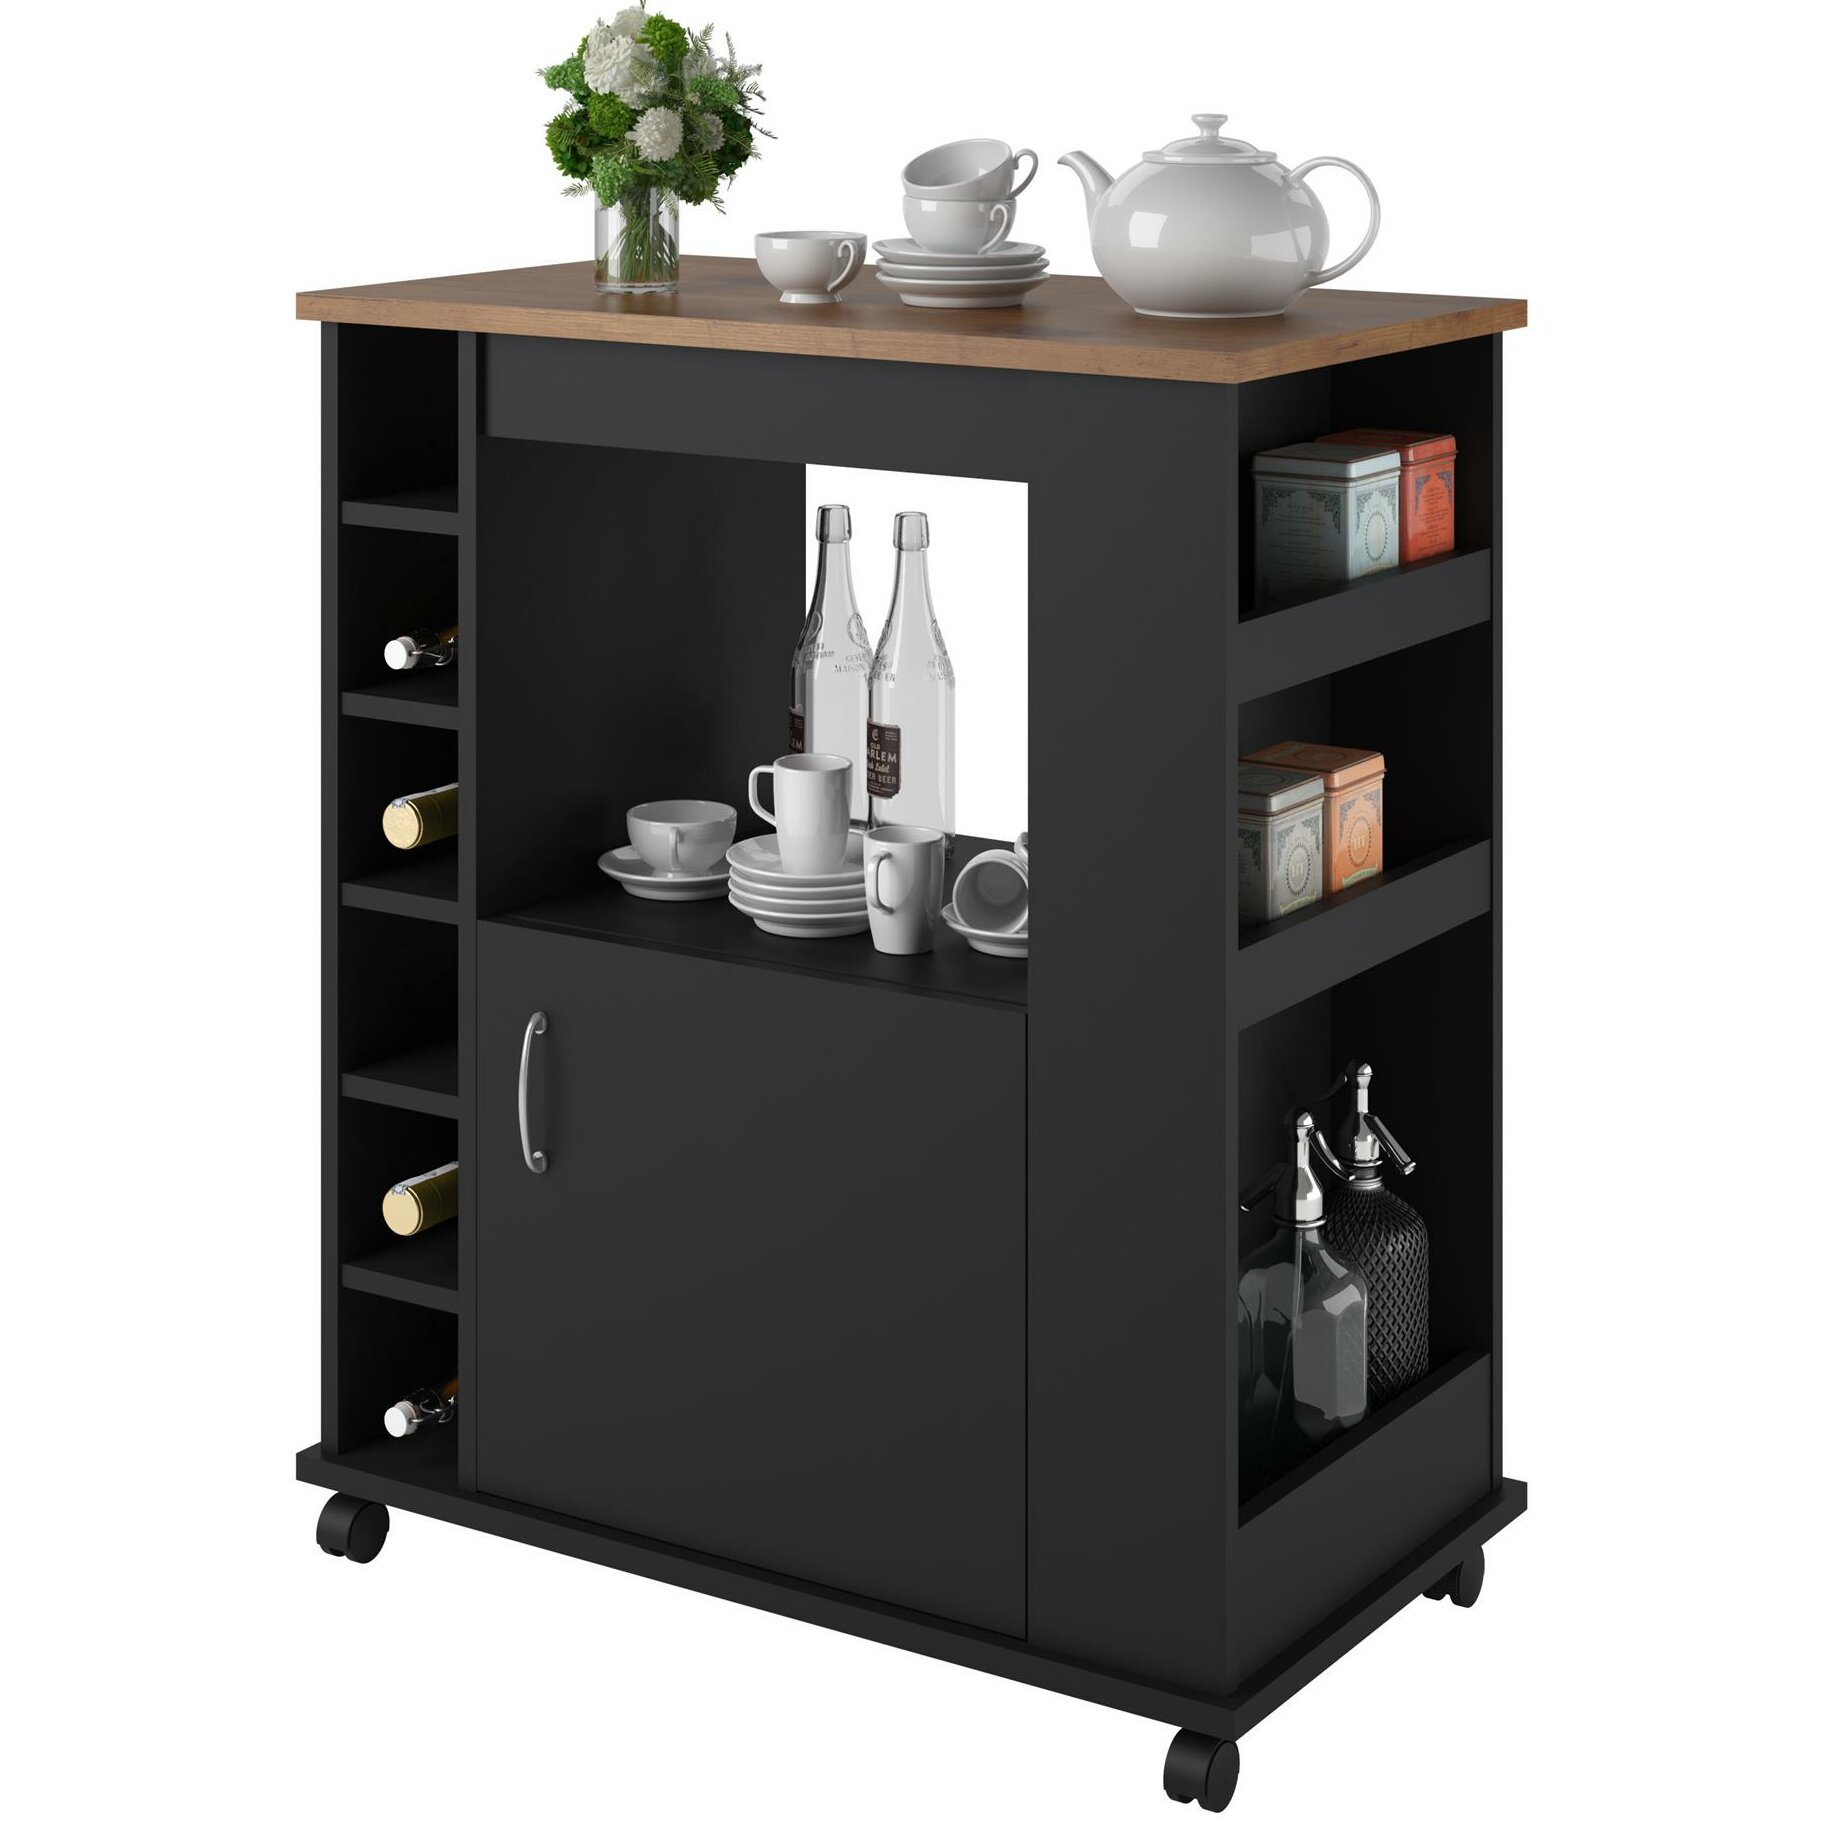 Charlton Home Worcester Kitchen Cart with Wood Top in Black & Reviews